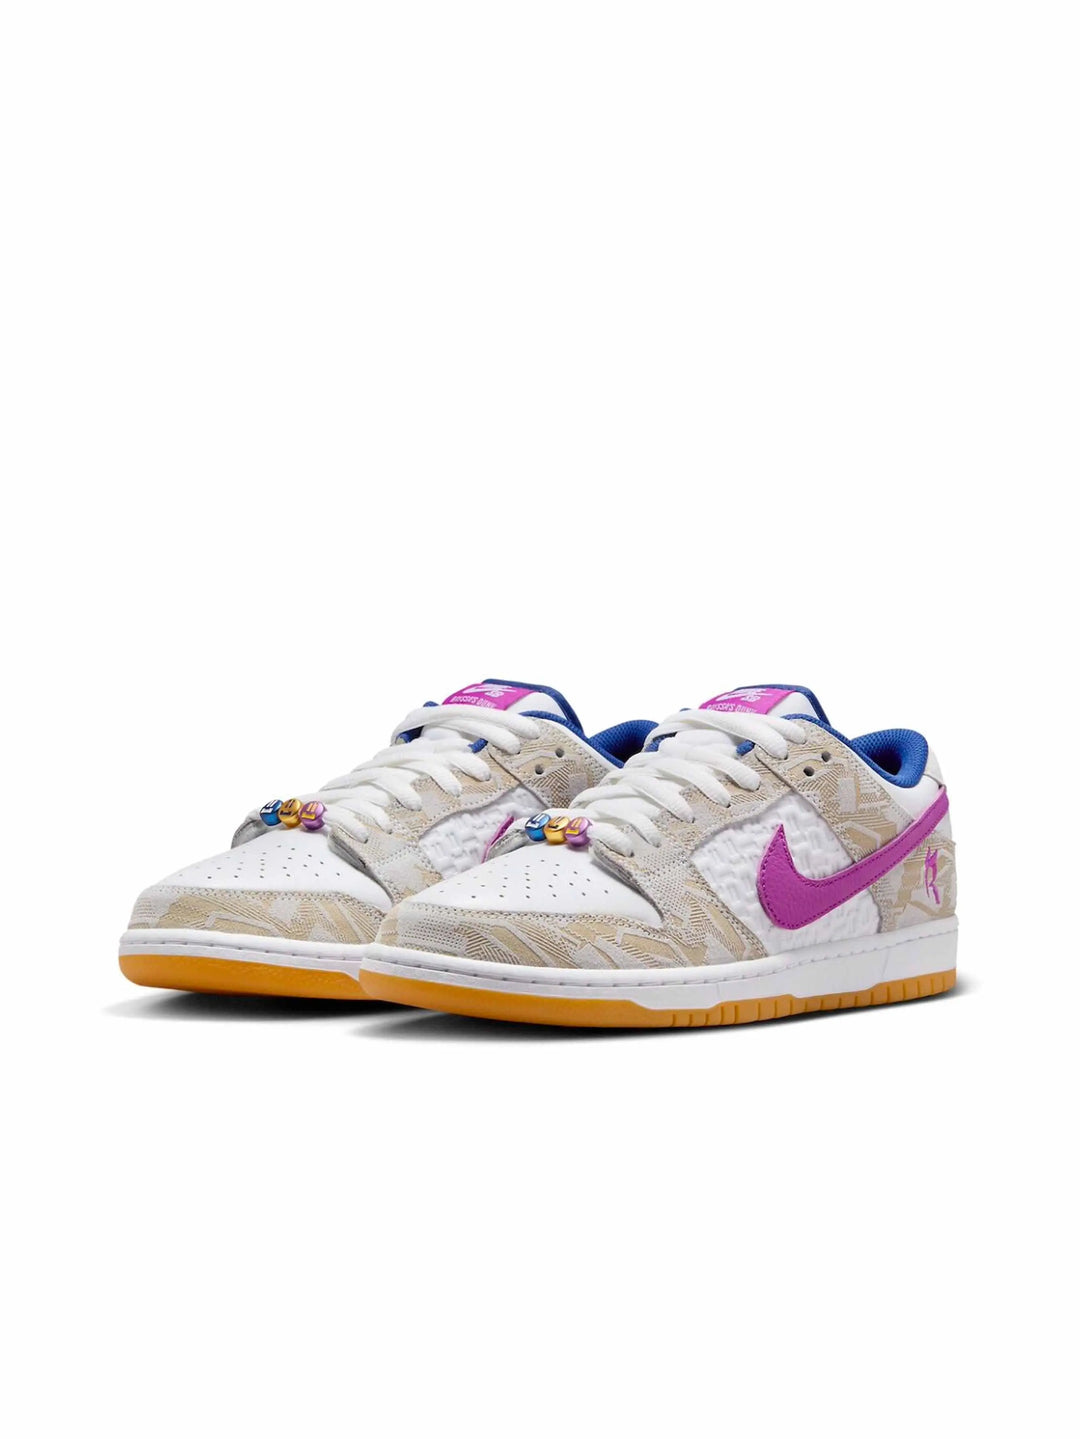 Nike SB Dunk Low Rayssa Leal in Auckland, New Zealand - Shop name